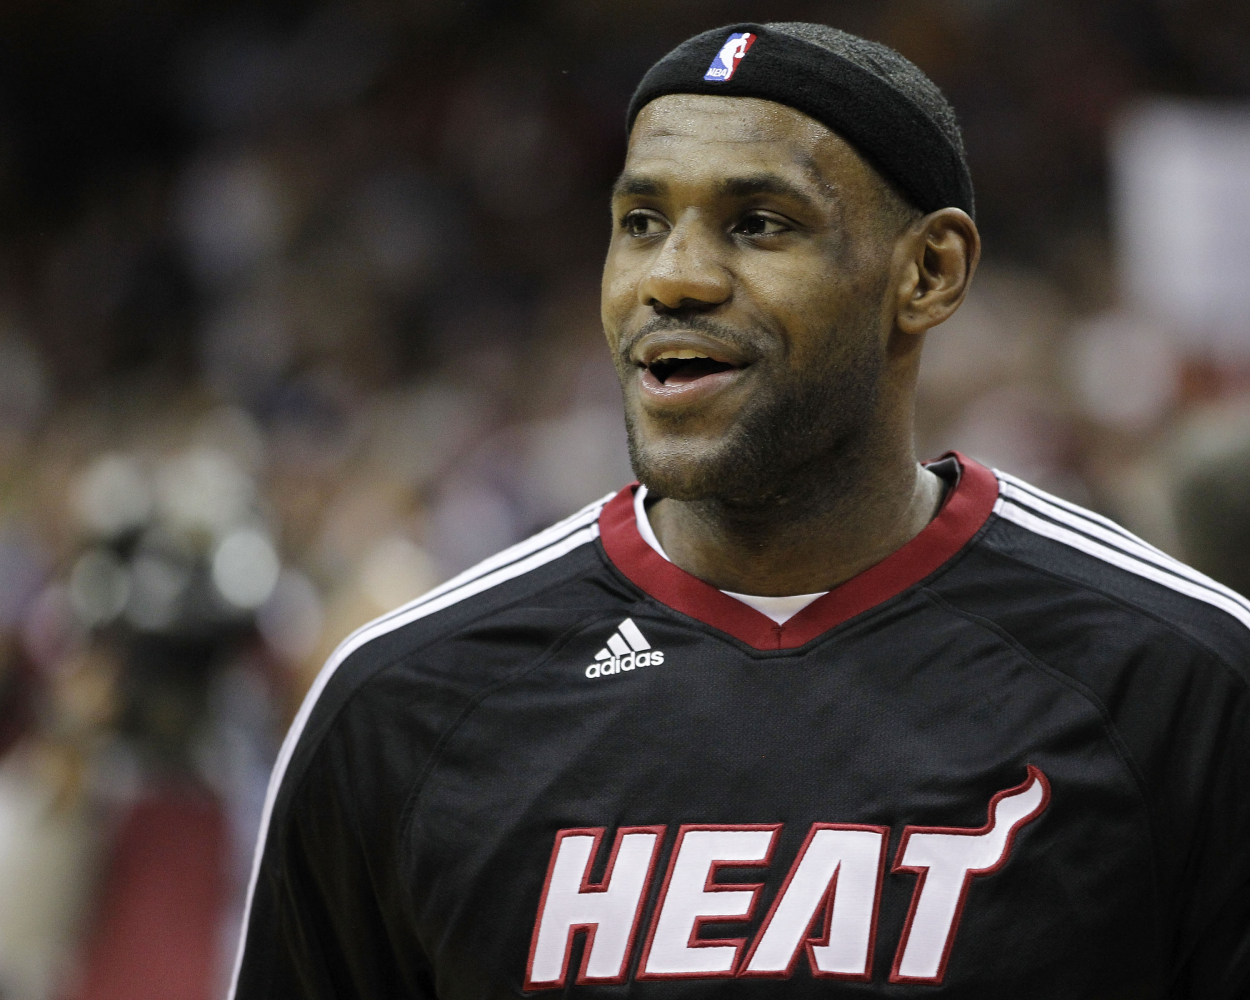 LeBron James before playing the Cavs while with the Heat in 2010.